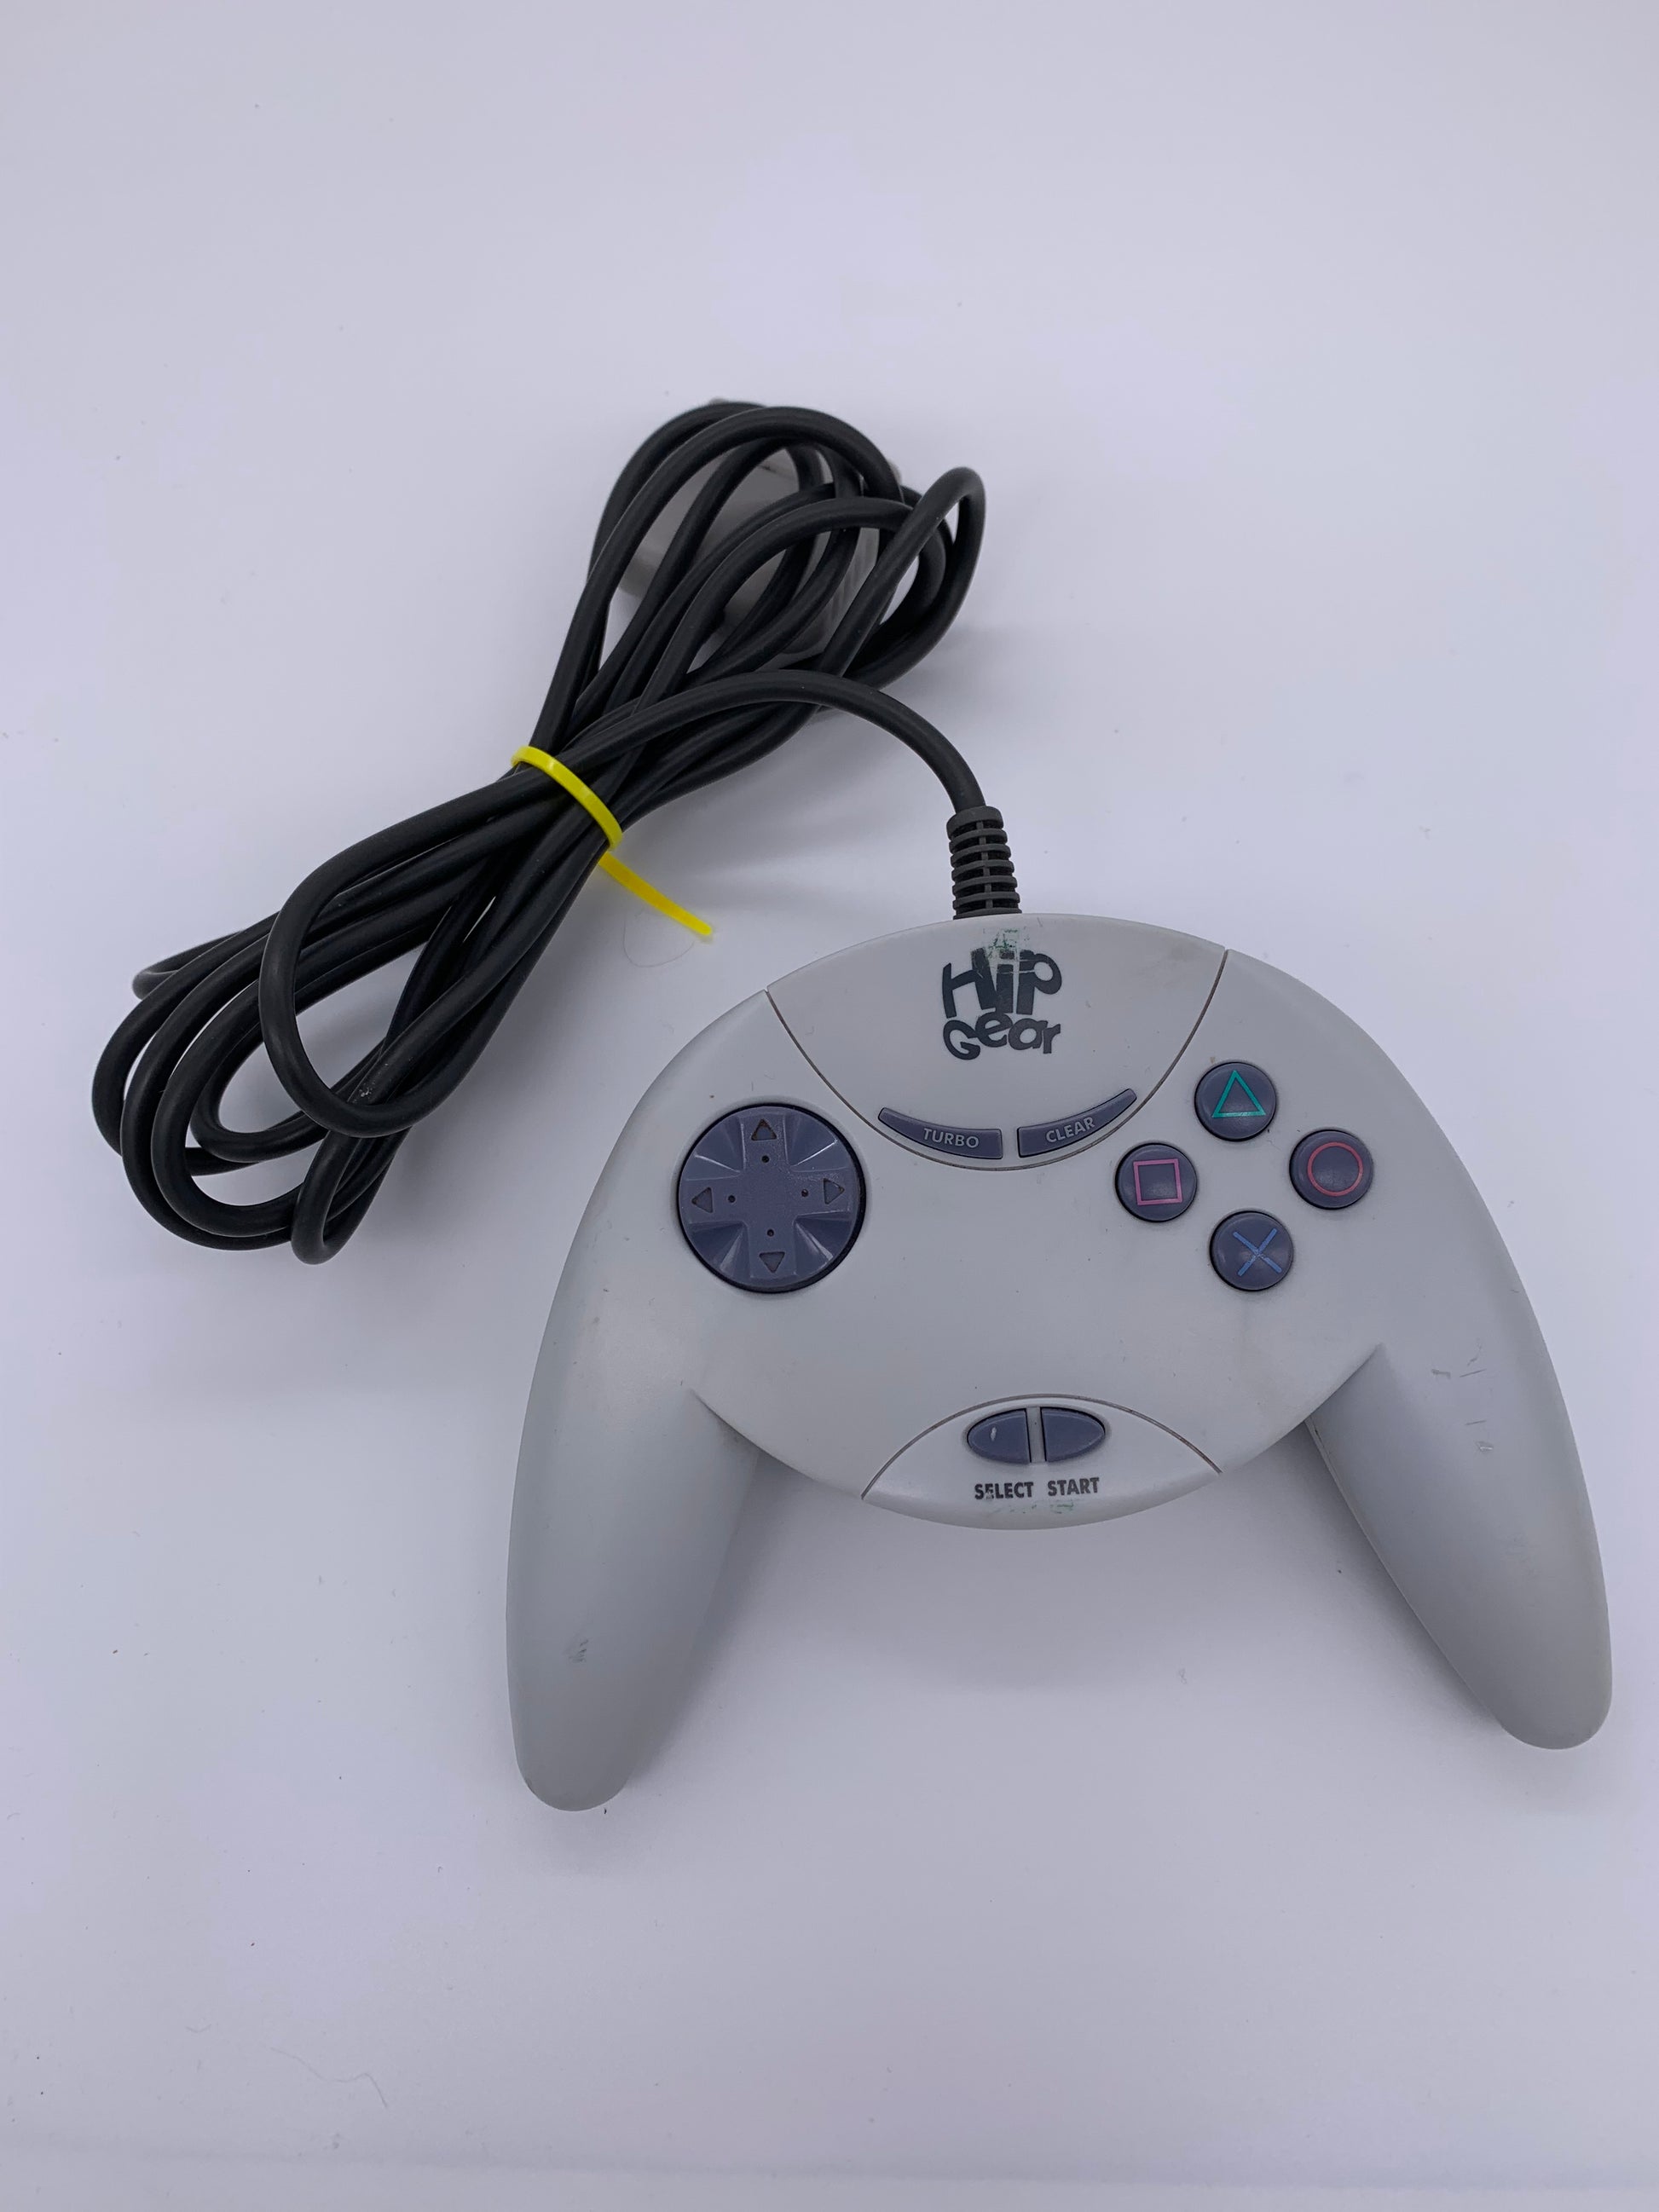 PiXEL-RETRO.COM : SONY PLAYSTATION (PS1) CONTROLLER JOYSTICK NTSC HIP GEAR PLAYERS PACK LM380 4501